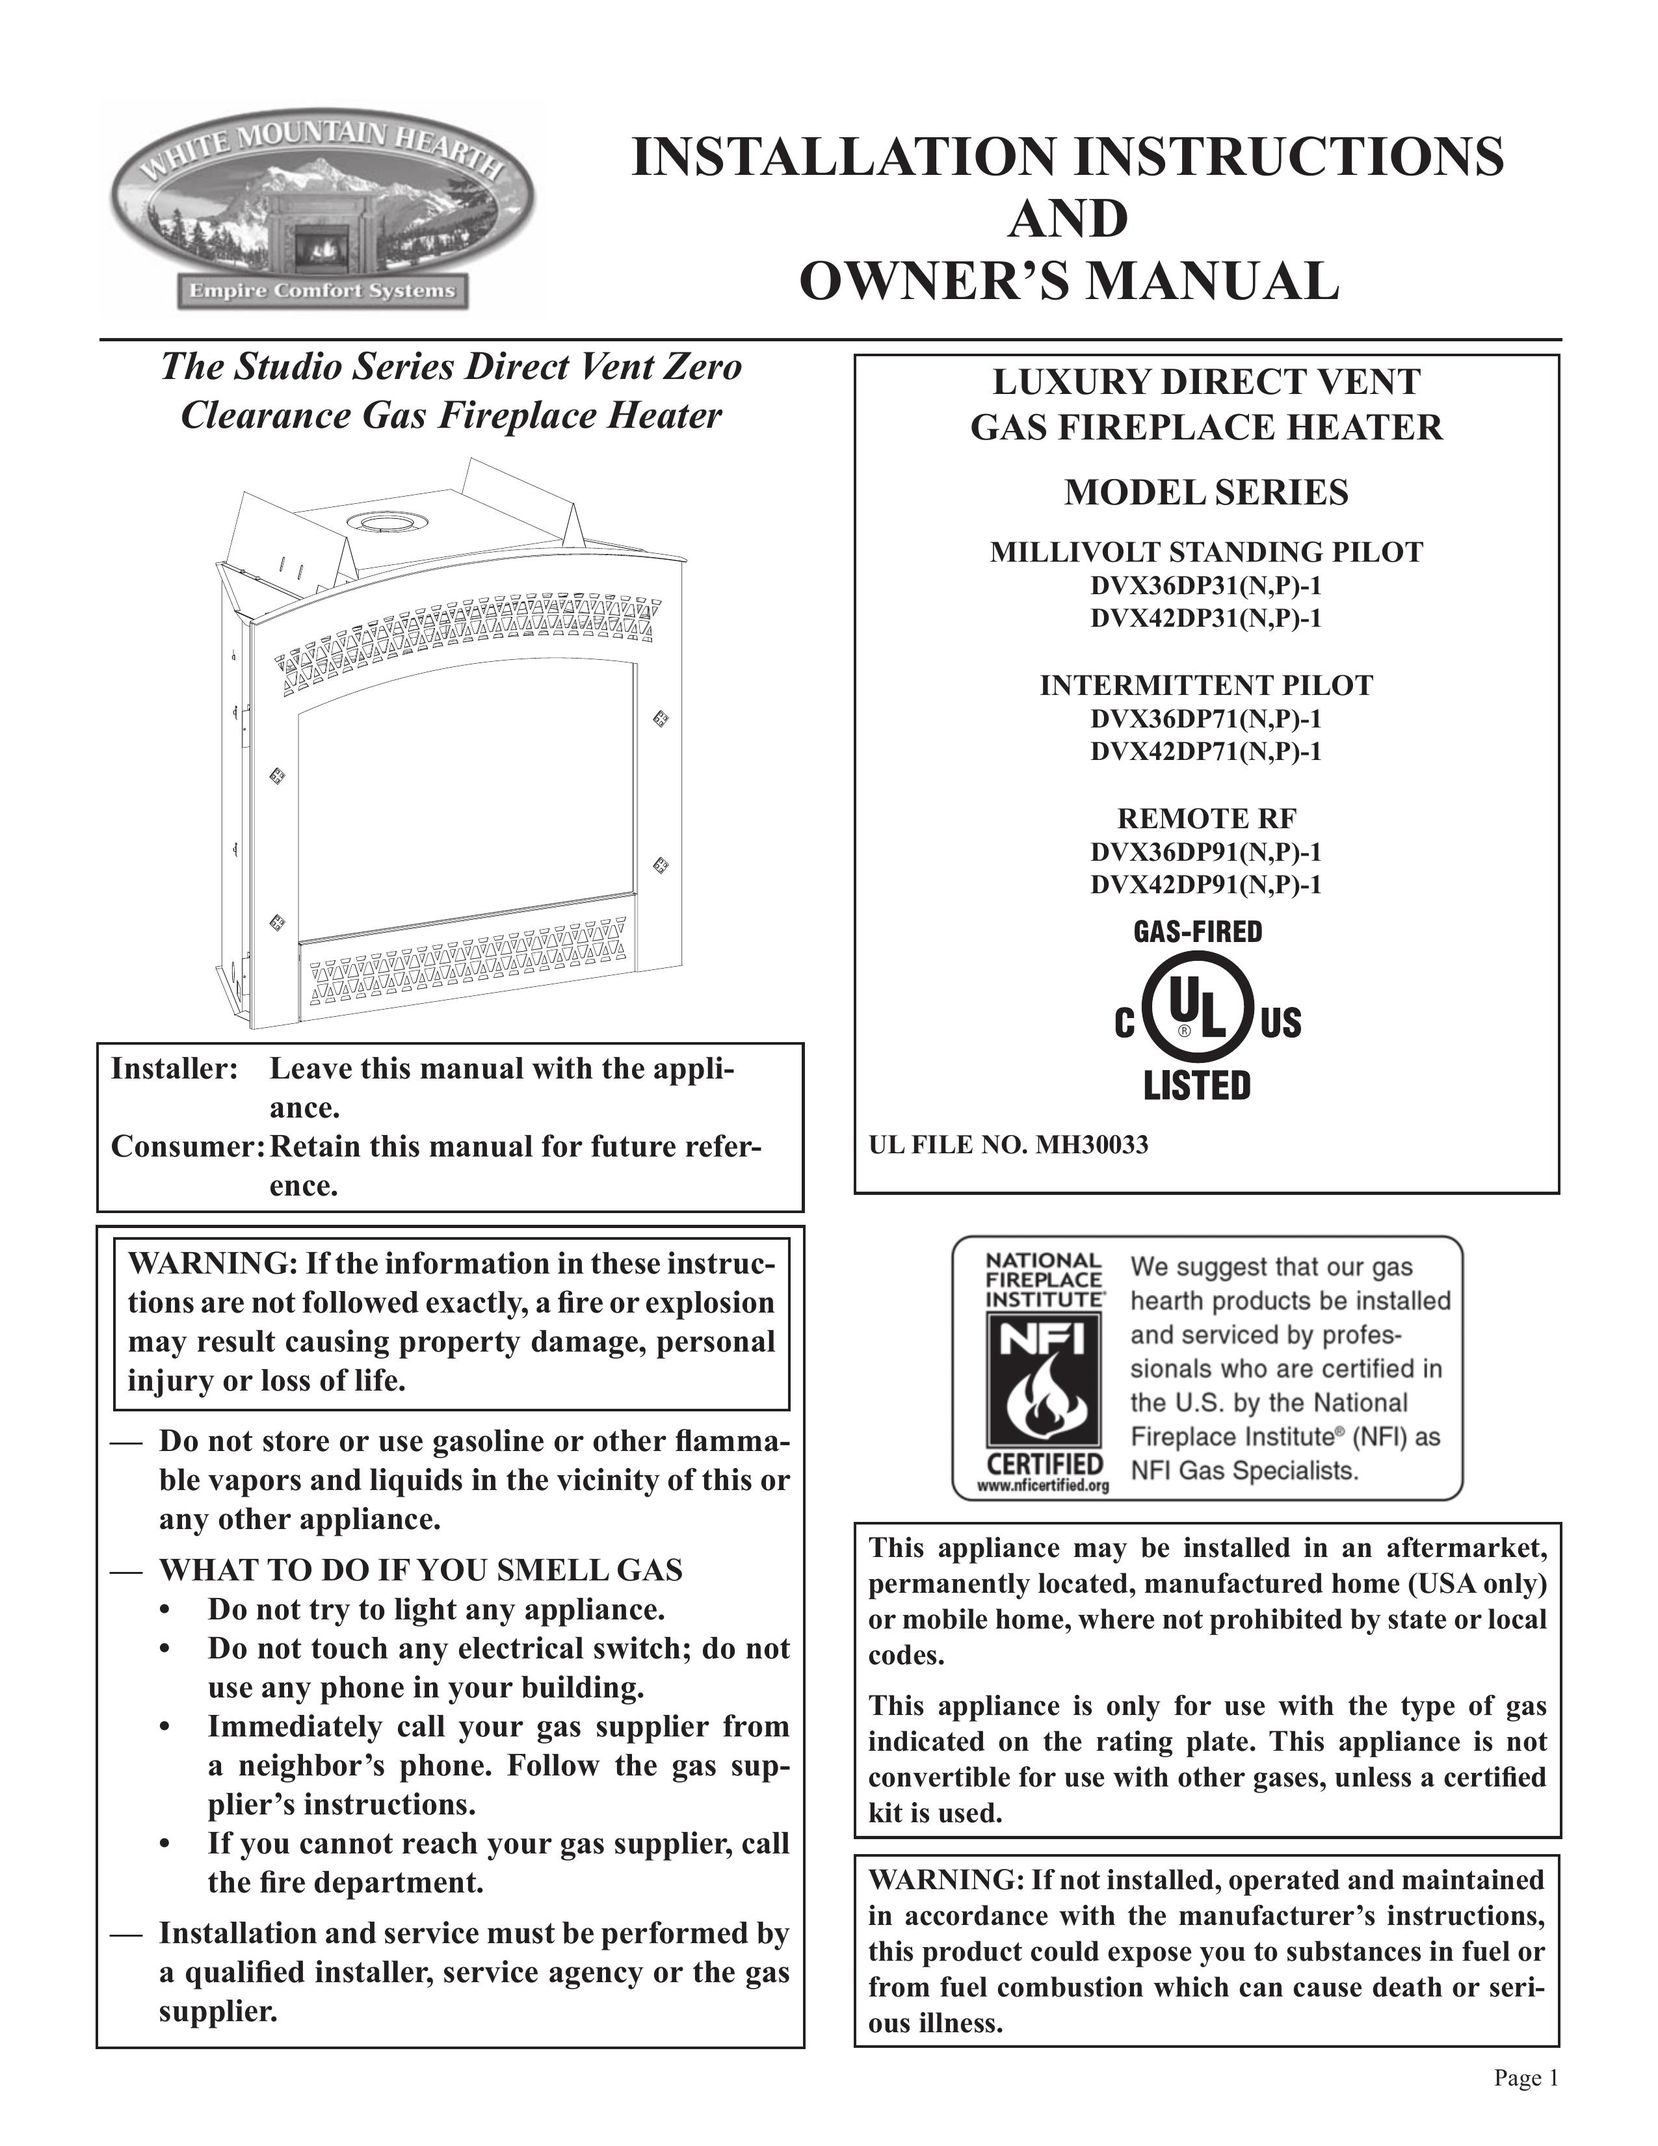 Empire Comfort Systems DVX42DP91(N,P)-1 Gas Heater User Manual